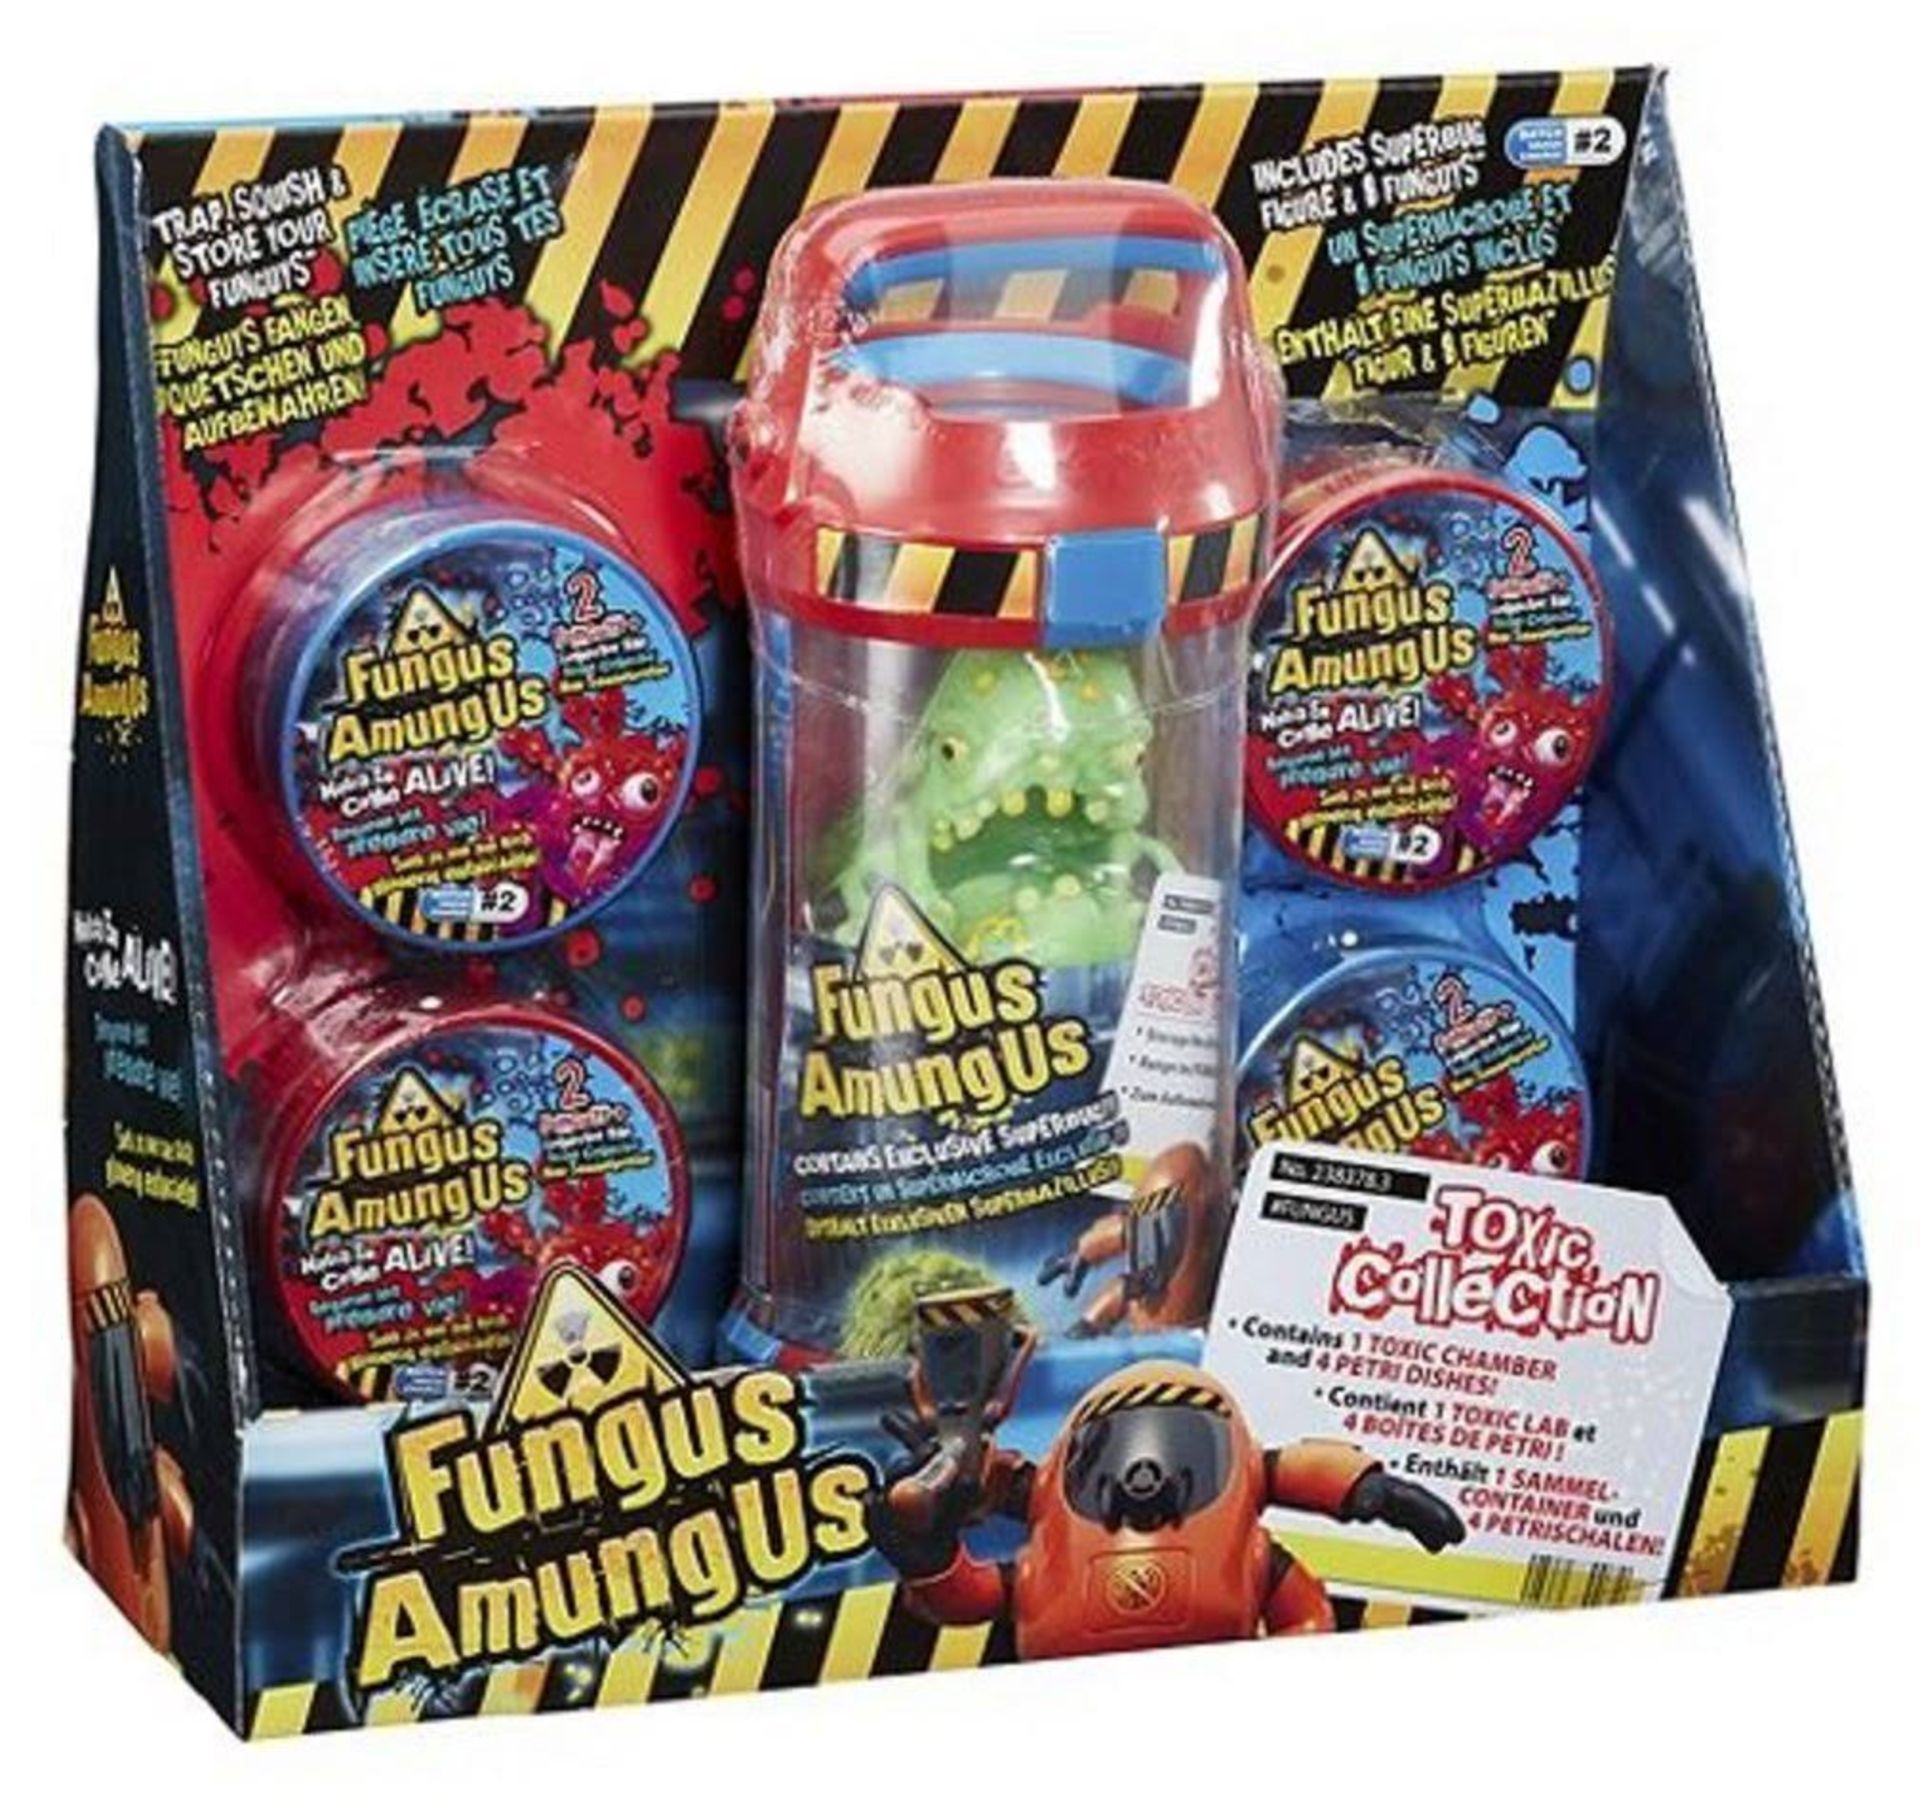 V Brand New Fungus Amungus Toxic Collection ISP Up To £24.99 (Ebay) X 2 YOUR BID PRICE TO BE